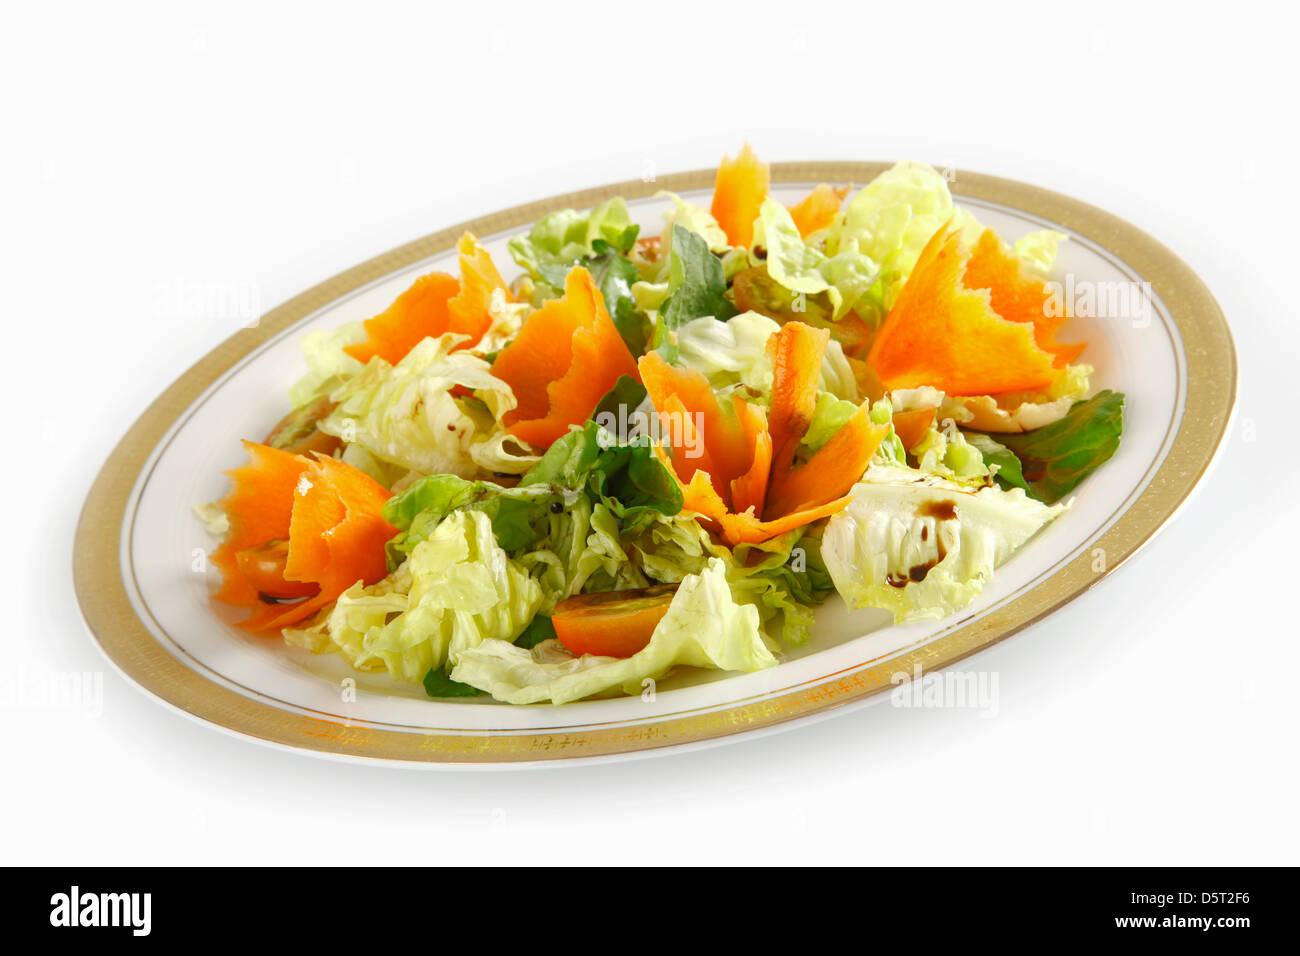 Fresh vegetables: carrot and lettuce; healthy eating and dietary Stock Photo